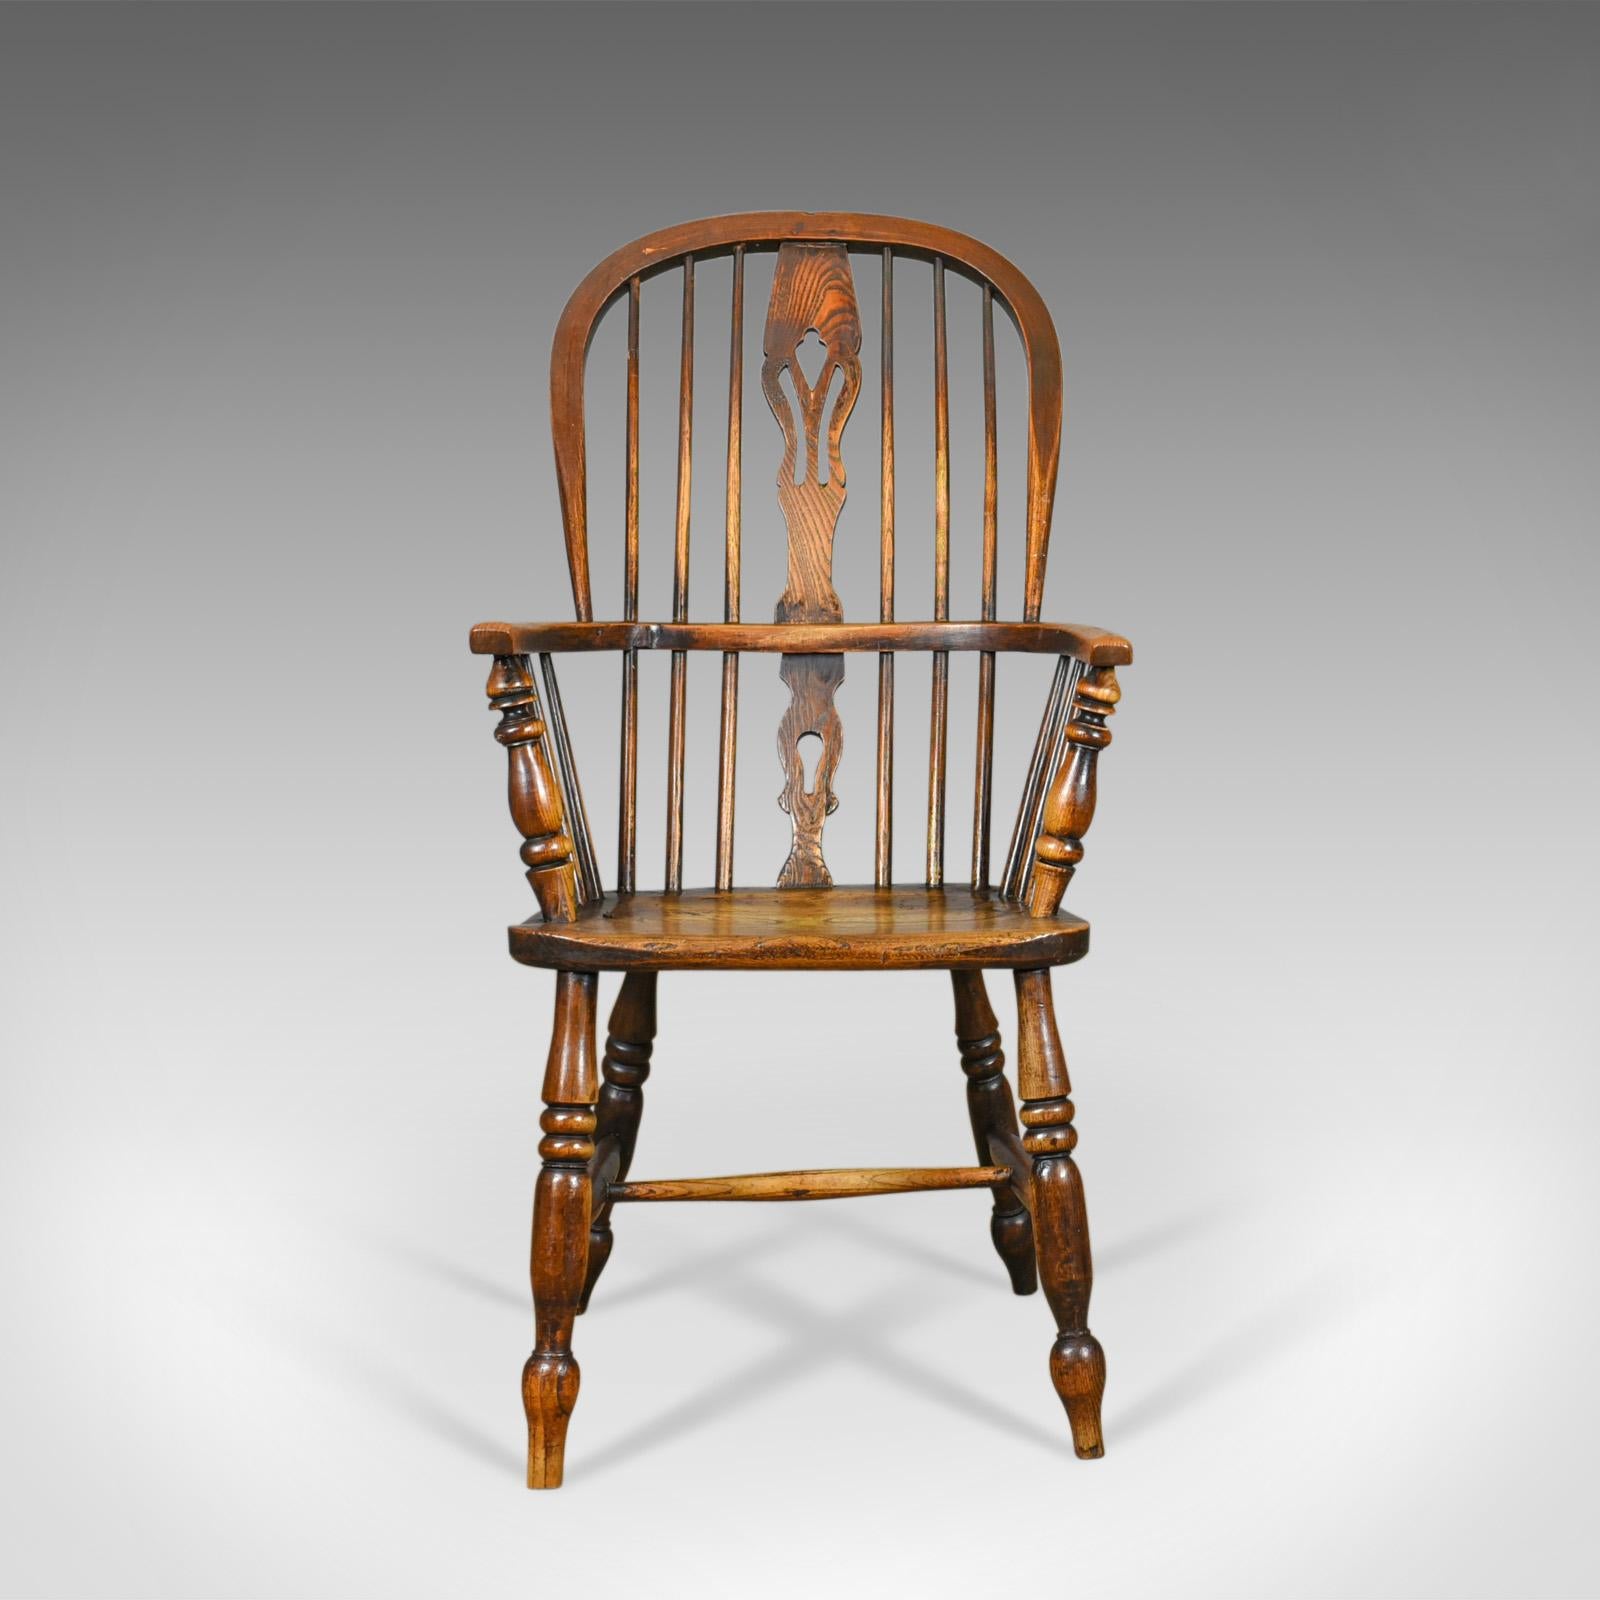 This is an antique Windsor armchair, a Victorian, country kitchen, stick back elbow chair in elm and ash dating to circa 1850.

Stunning chair in fine order throughout
Classic pierced back splat above and below the arm bow
Raked, bentwood back